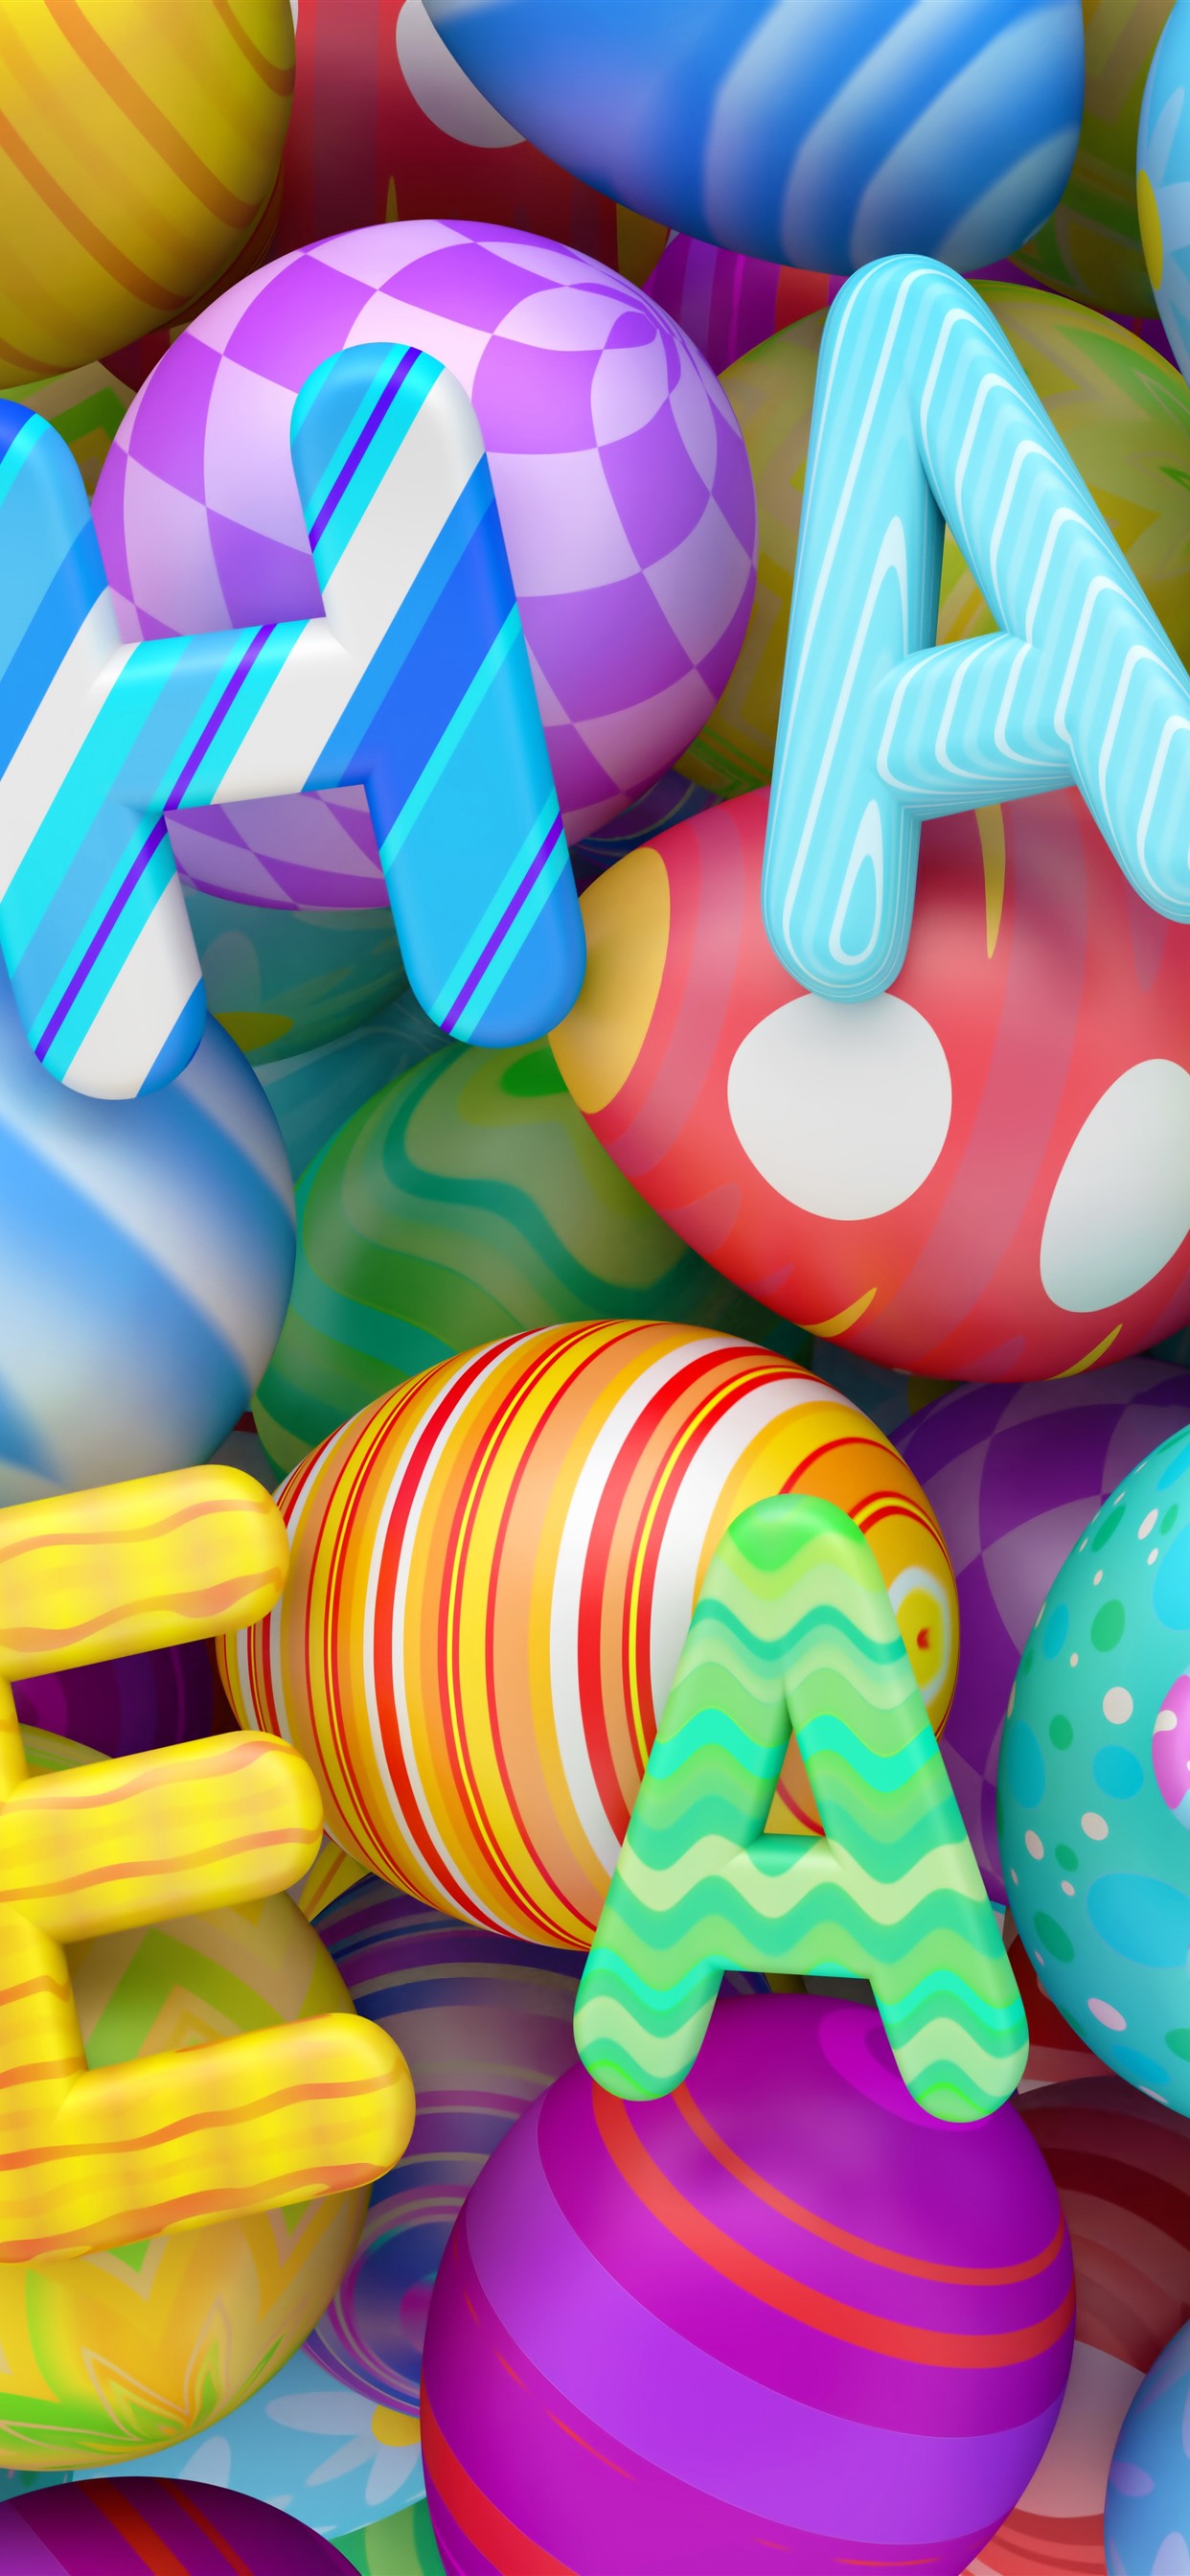 Iphone Wallpaper Happy Easter, Colorful Eggs, 3d Design - Easter Eggs -  1242x2688 Wallpaper 